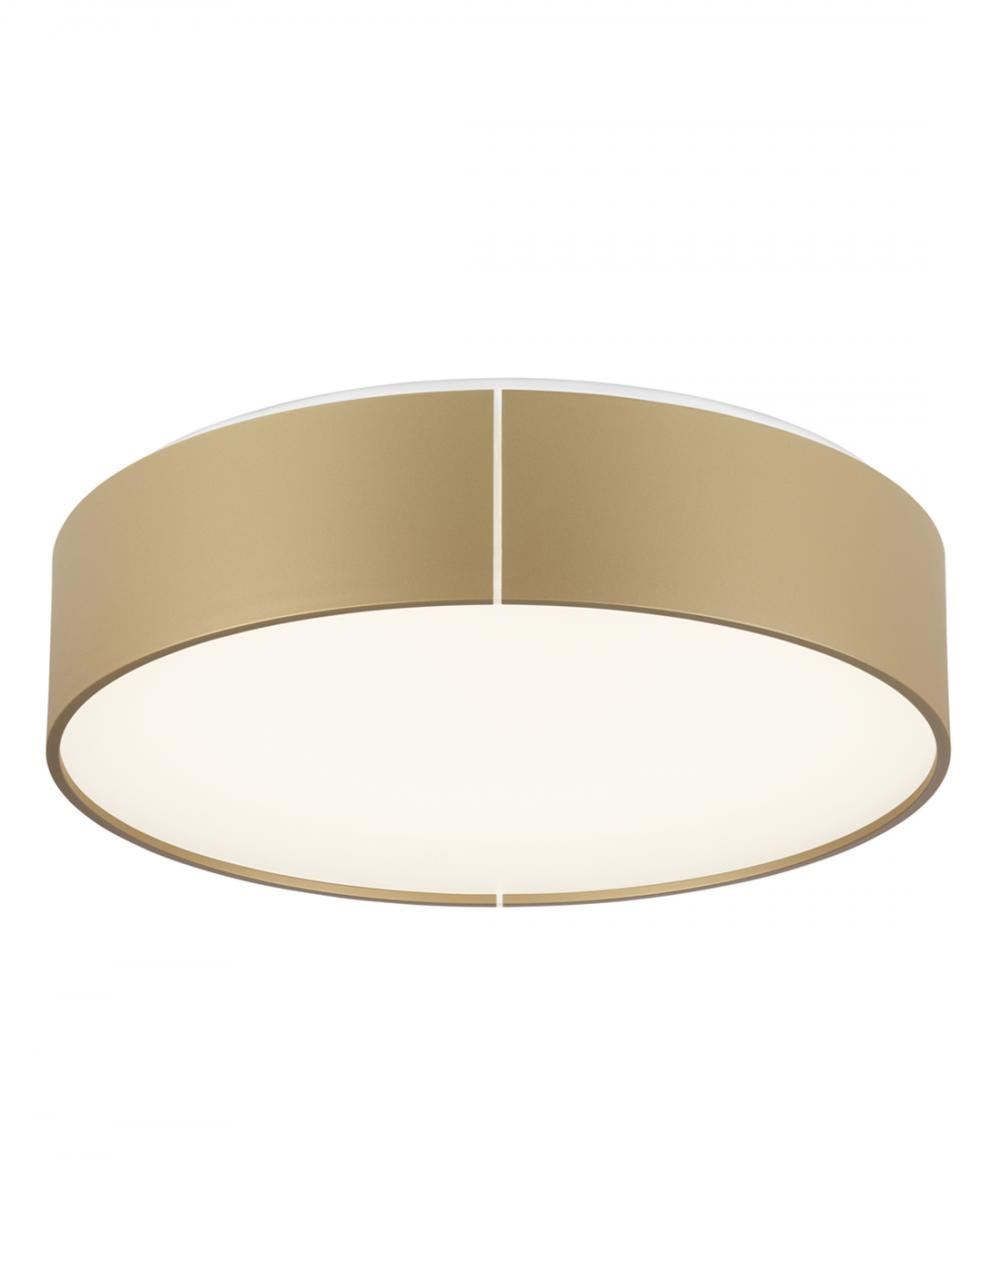 Allright Ceiling Light Bronze 26w Dimmable